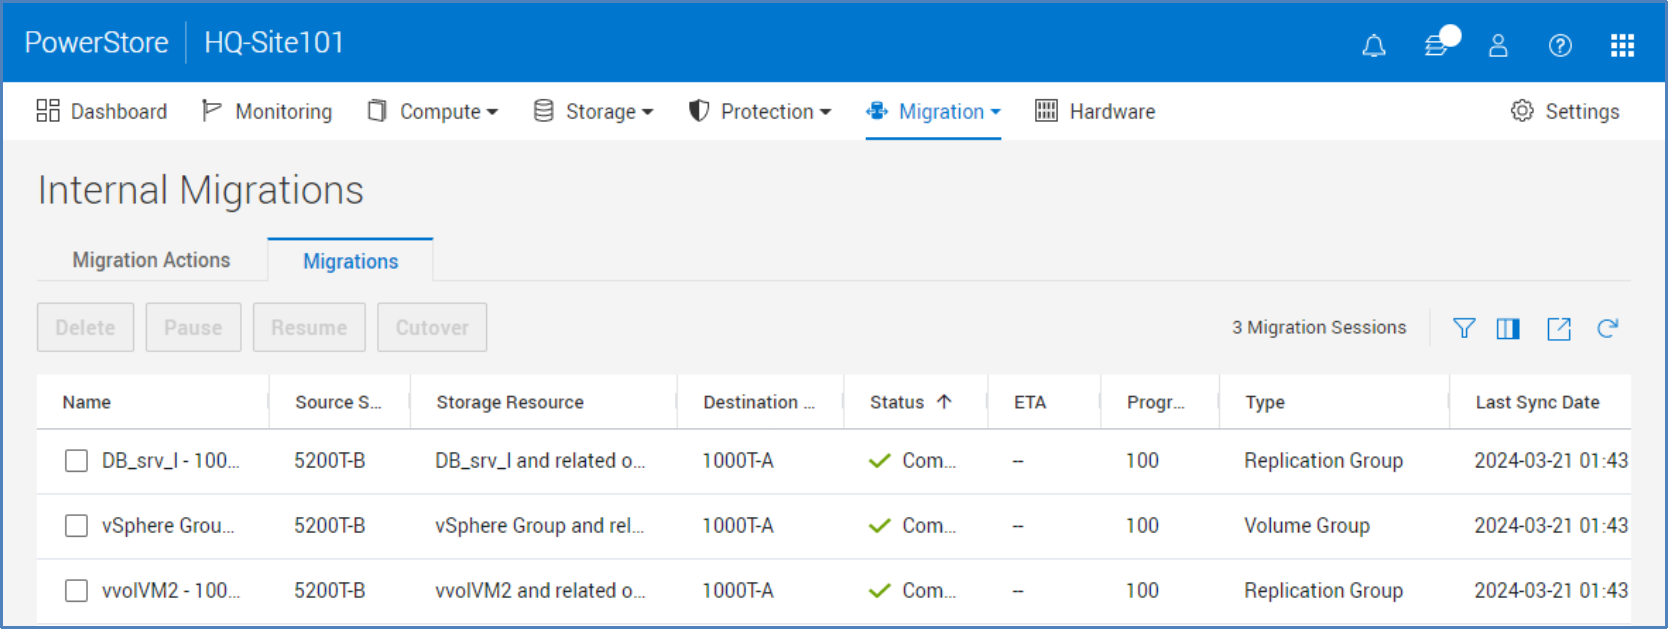 The Migrations page shows the various sessions and their current state. From here the Delete, Pause, Resume, and Cutover actions on a session can be run.